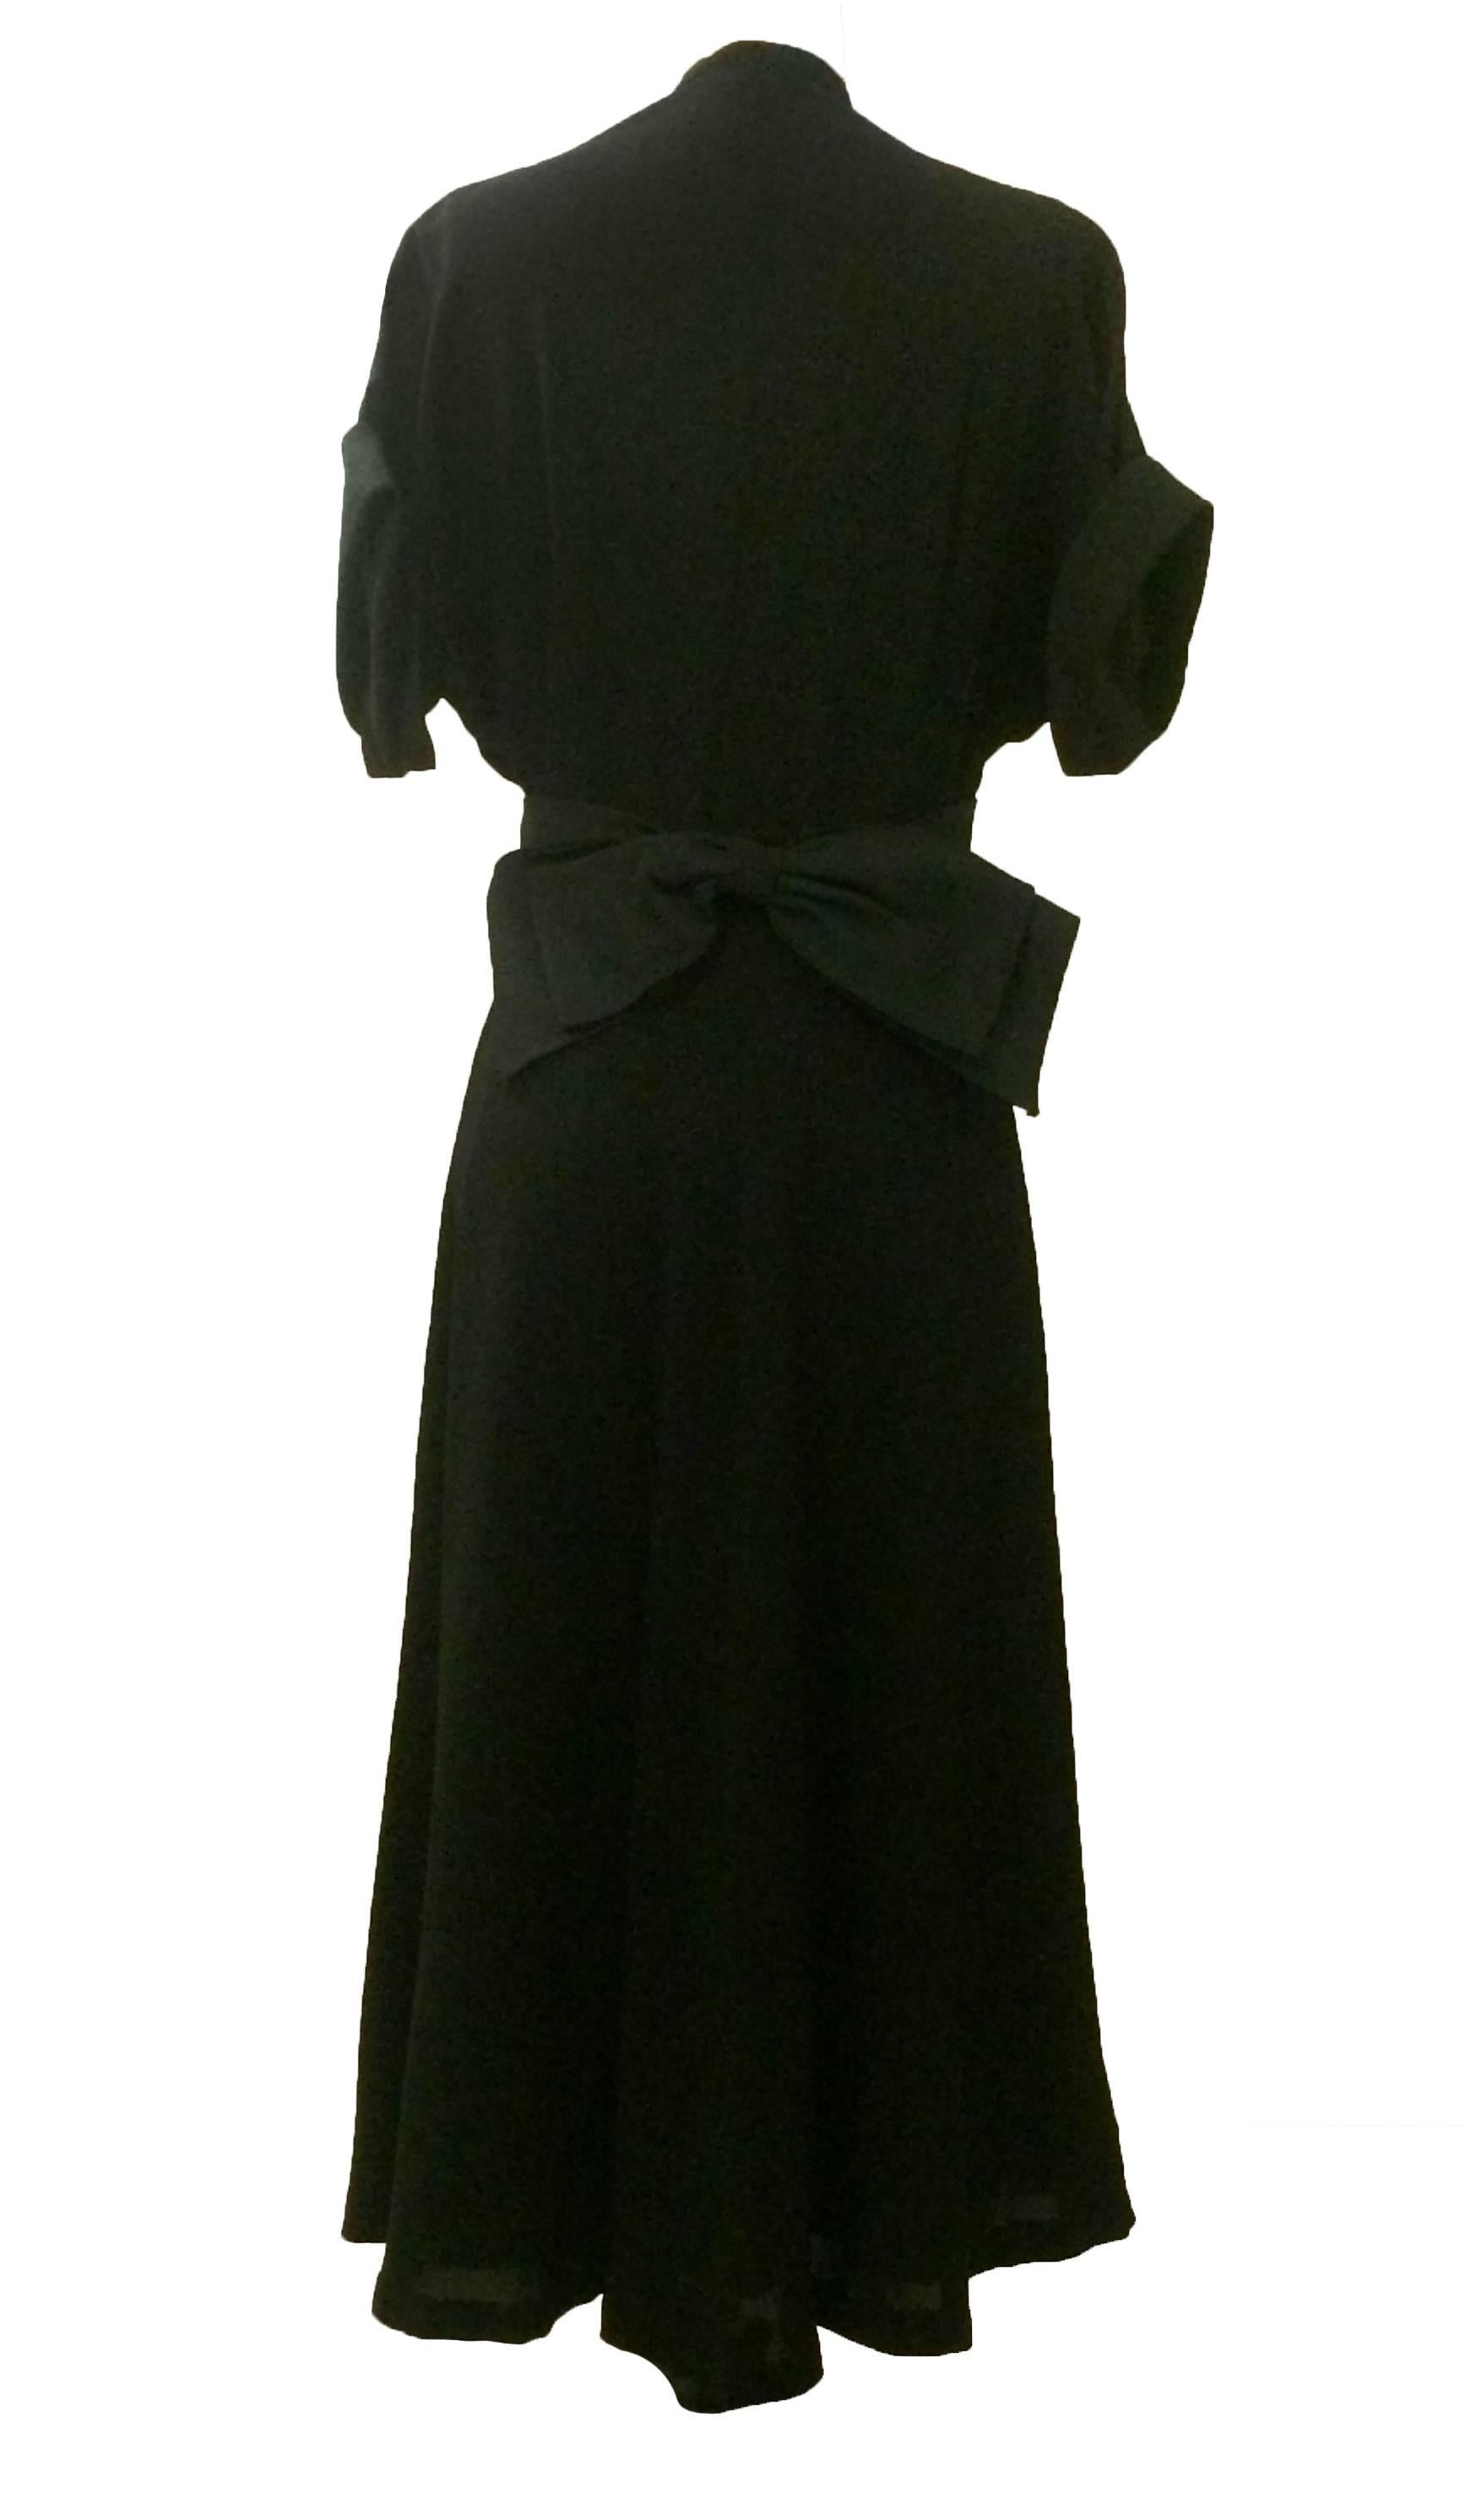 Late 1940's dress from American designer Nettie Rosenstein in black crepe. Pleating at bust, black heavy-faille sash with bow at back, as well as black faille trim at sleeve cuffs. Falls at mid-calf. Side zip. Lined at skirt. 

Lovely drape at